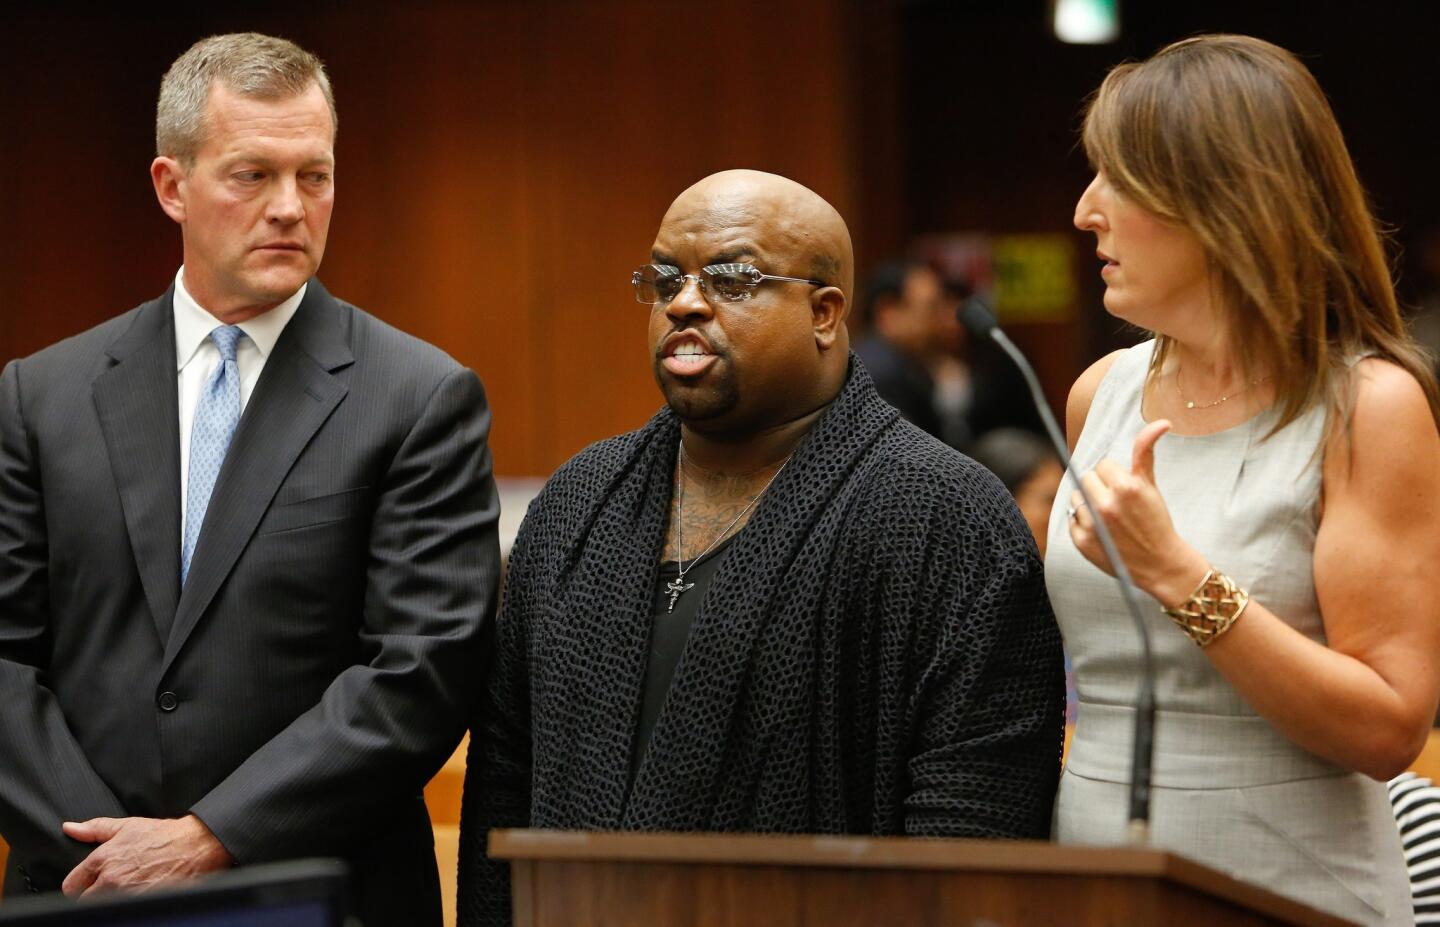 Cee Lo Green faces drug charge